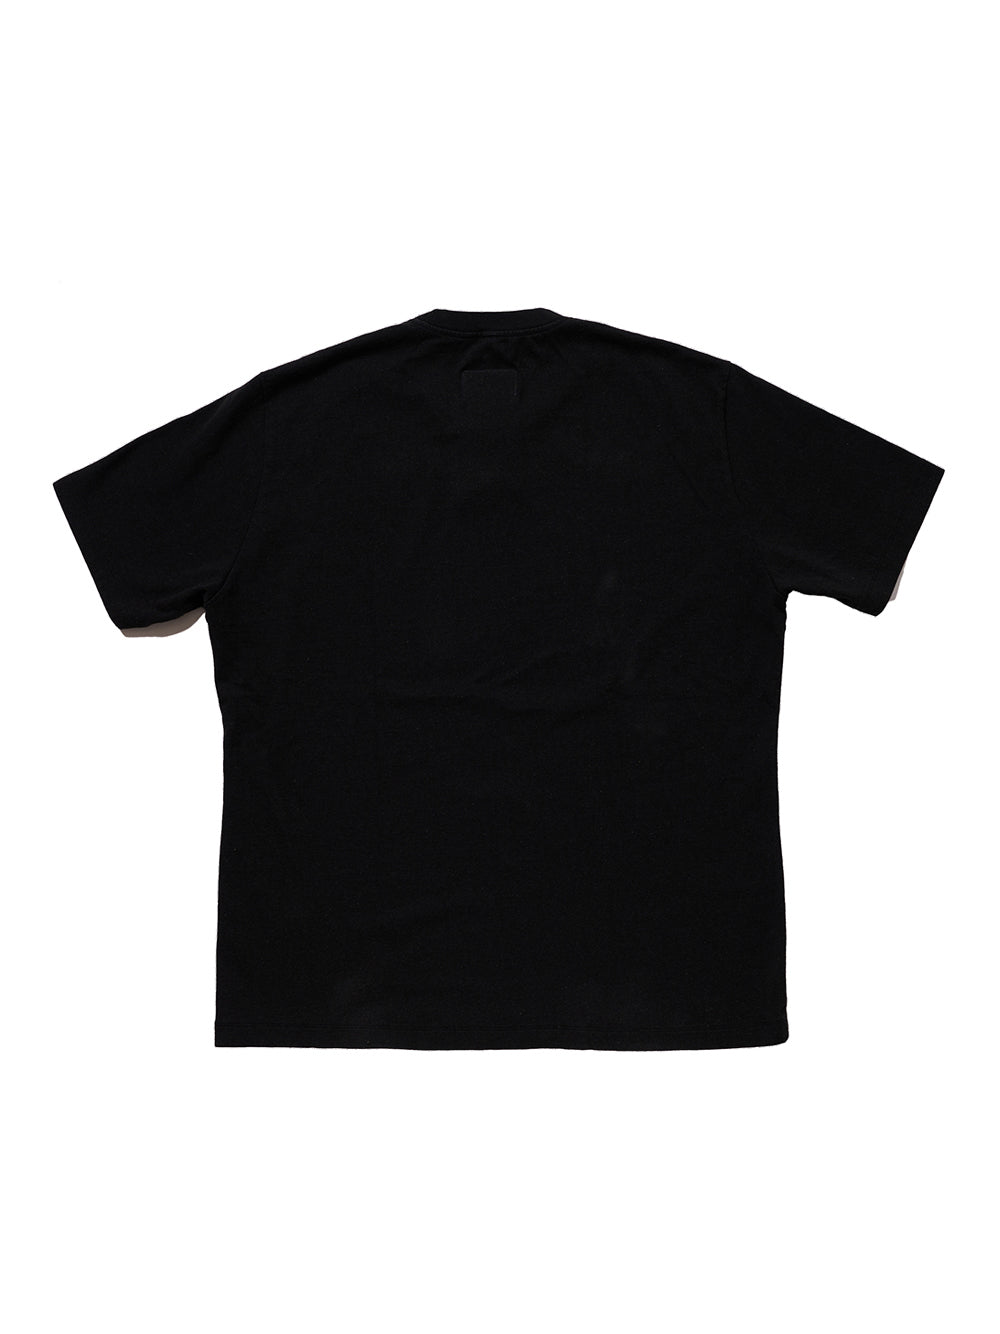 SD Card Embroidery T-Shirt (Black)